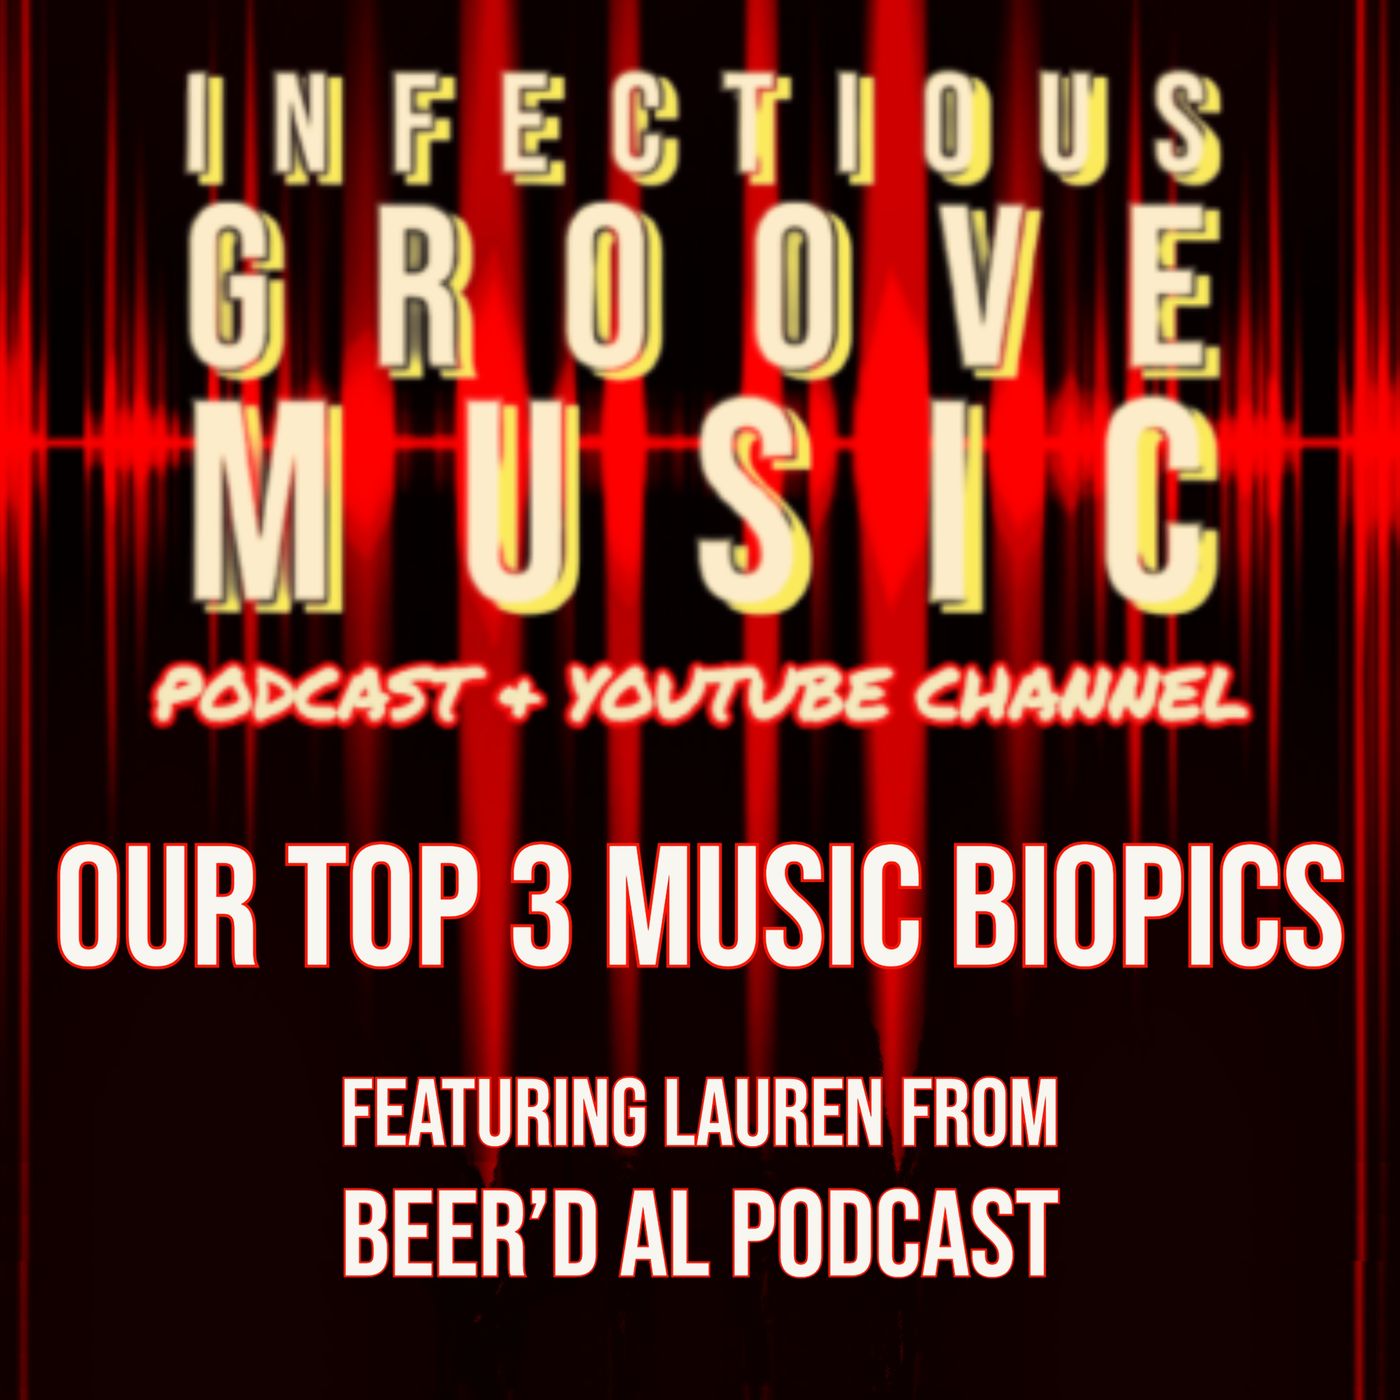 Our Favorite Music Biopics - with Lauren from Beer'd Al Podcast